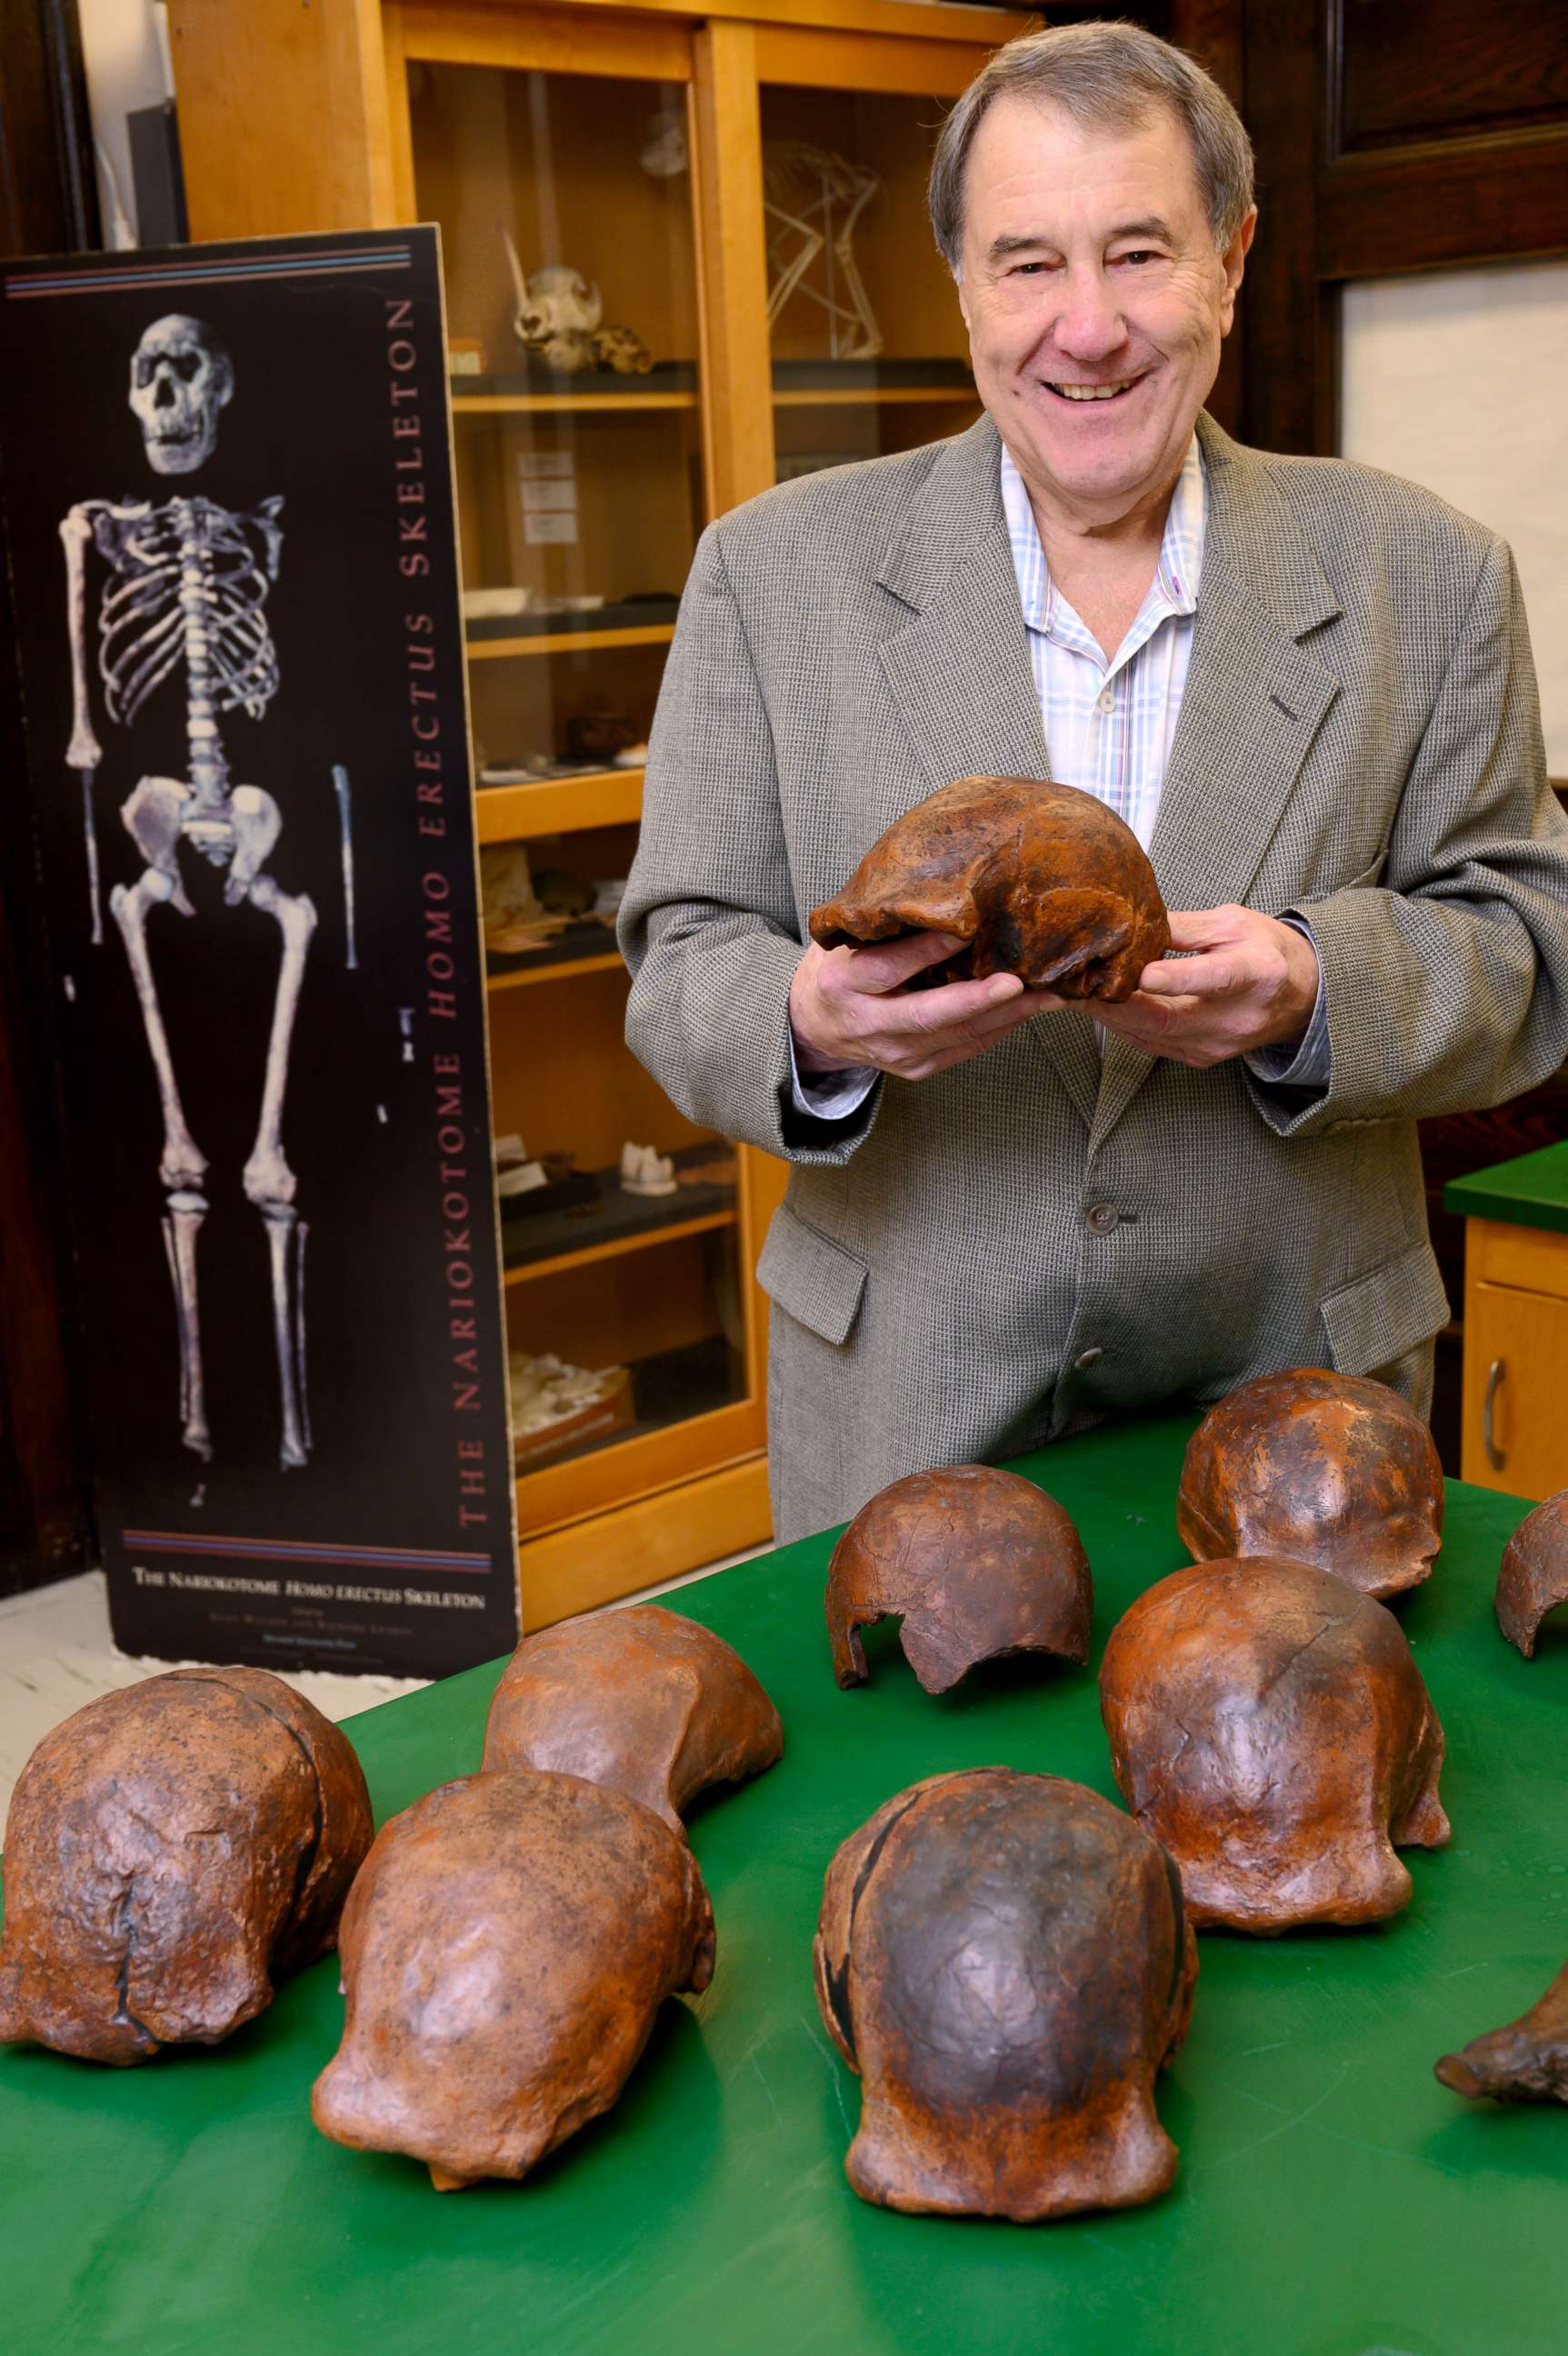 PHOTO: Palaeoanthropologist Russell Ciochon of the University of Iowa with a collection of Homo erectus fossil replicas from Ngandong.